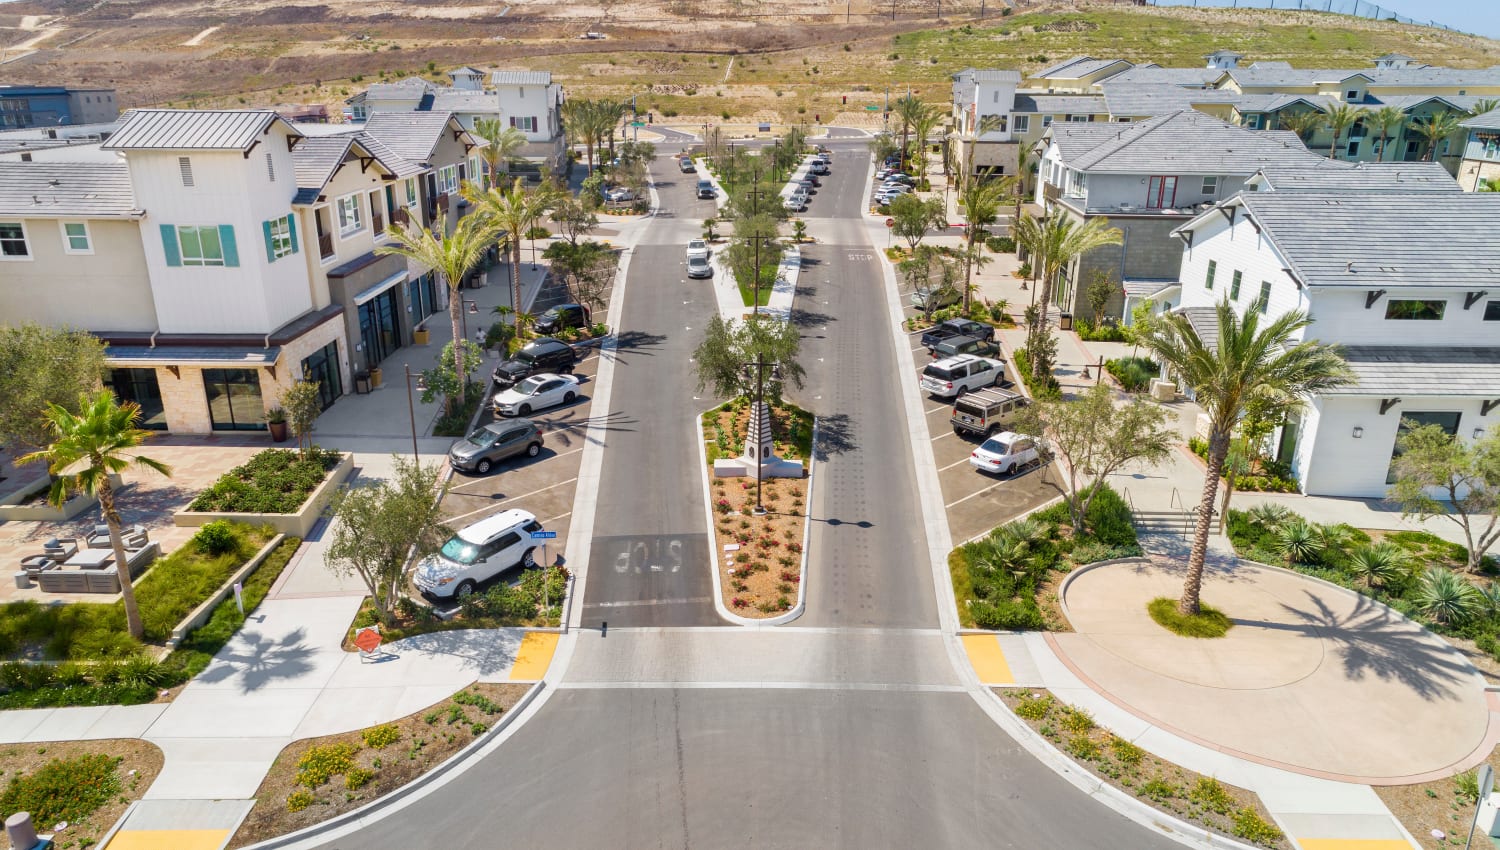 Aerial view of the street at The Residences at Escaya in Chula Vista, California